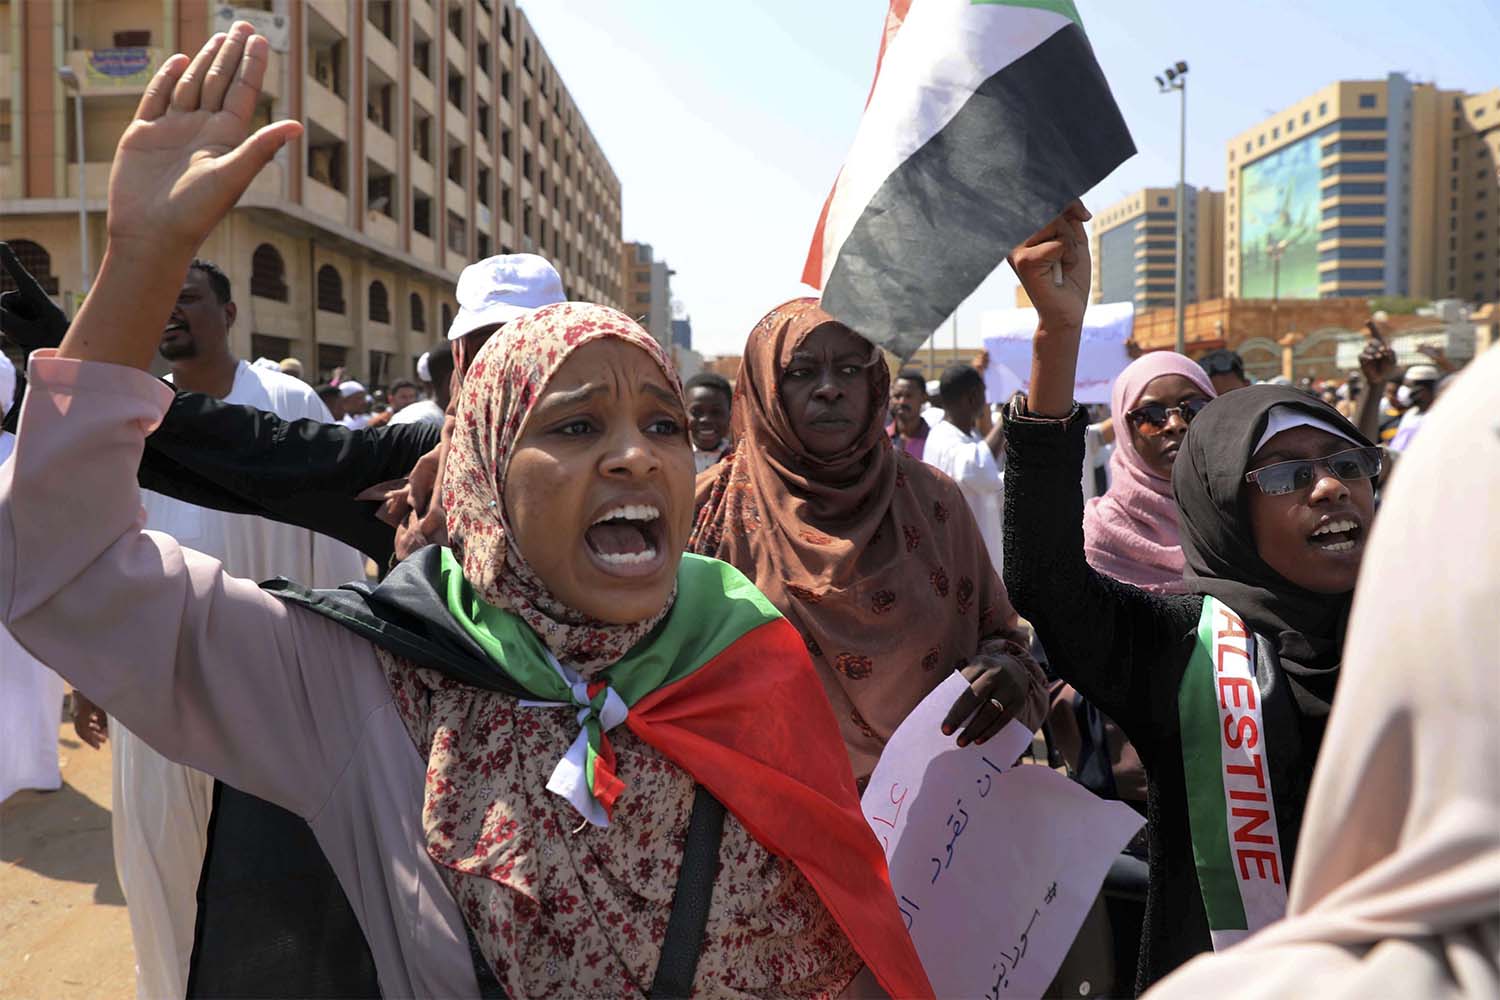 Scores of Sudanese protesters condemned Burhan's meeting with Netanyahu in February